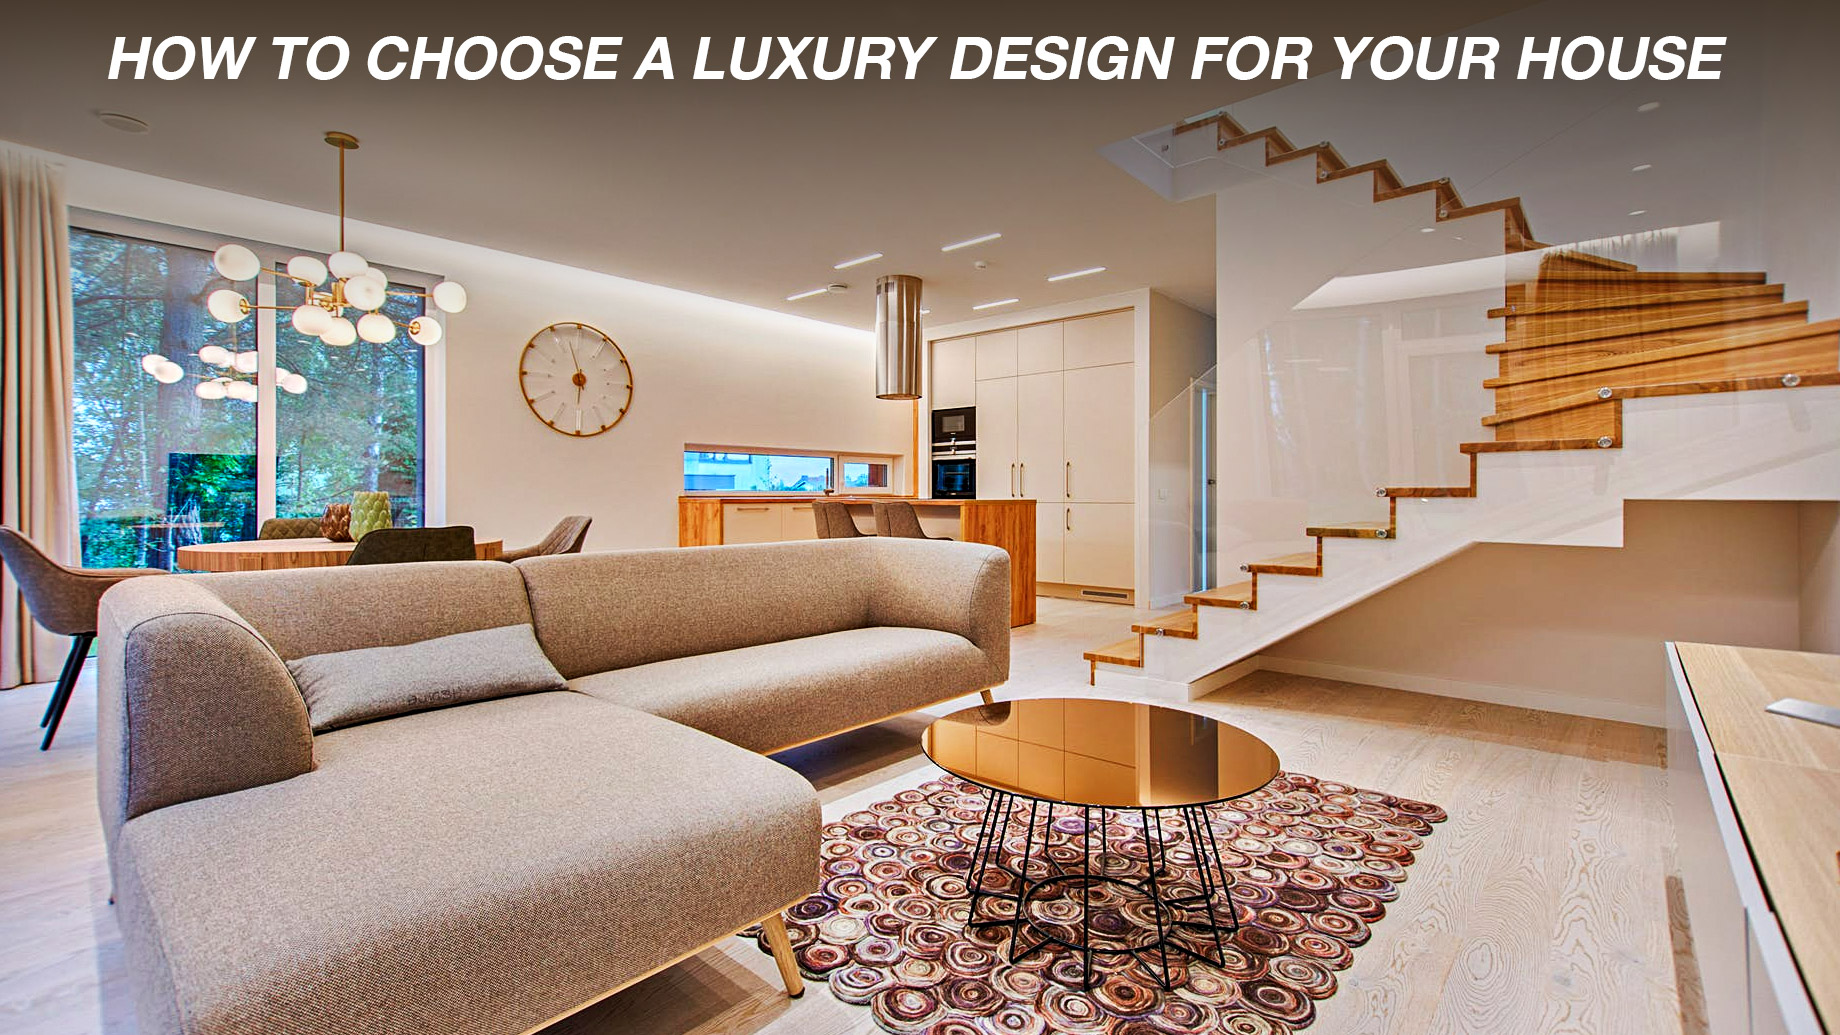 How To Choose a Luxury Design For Your House